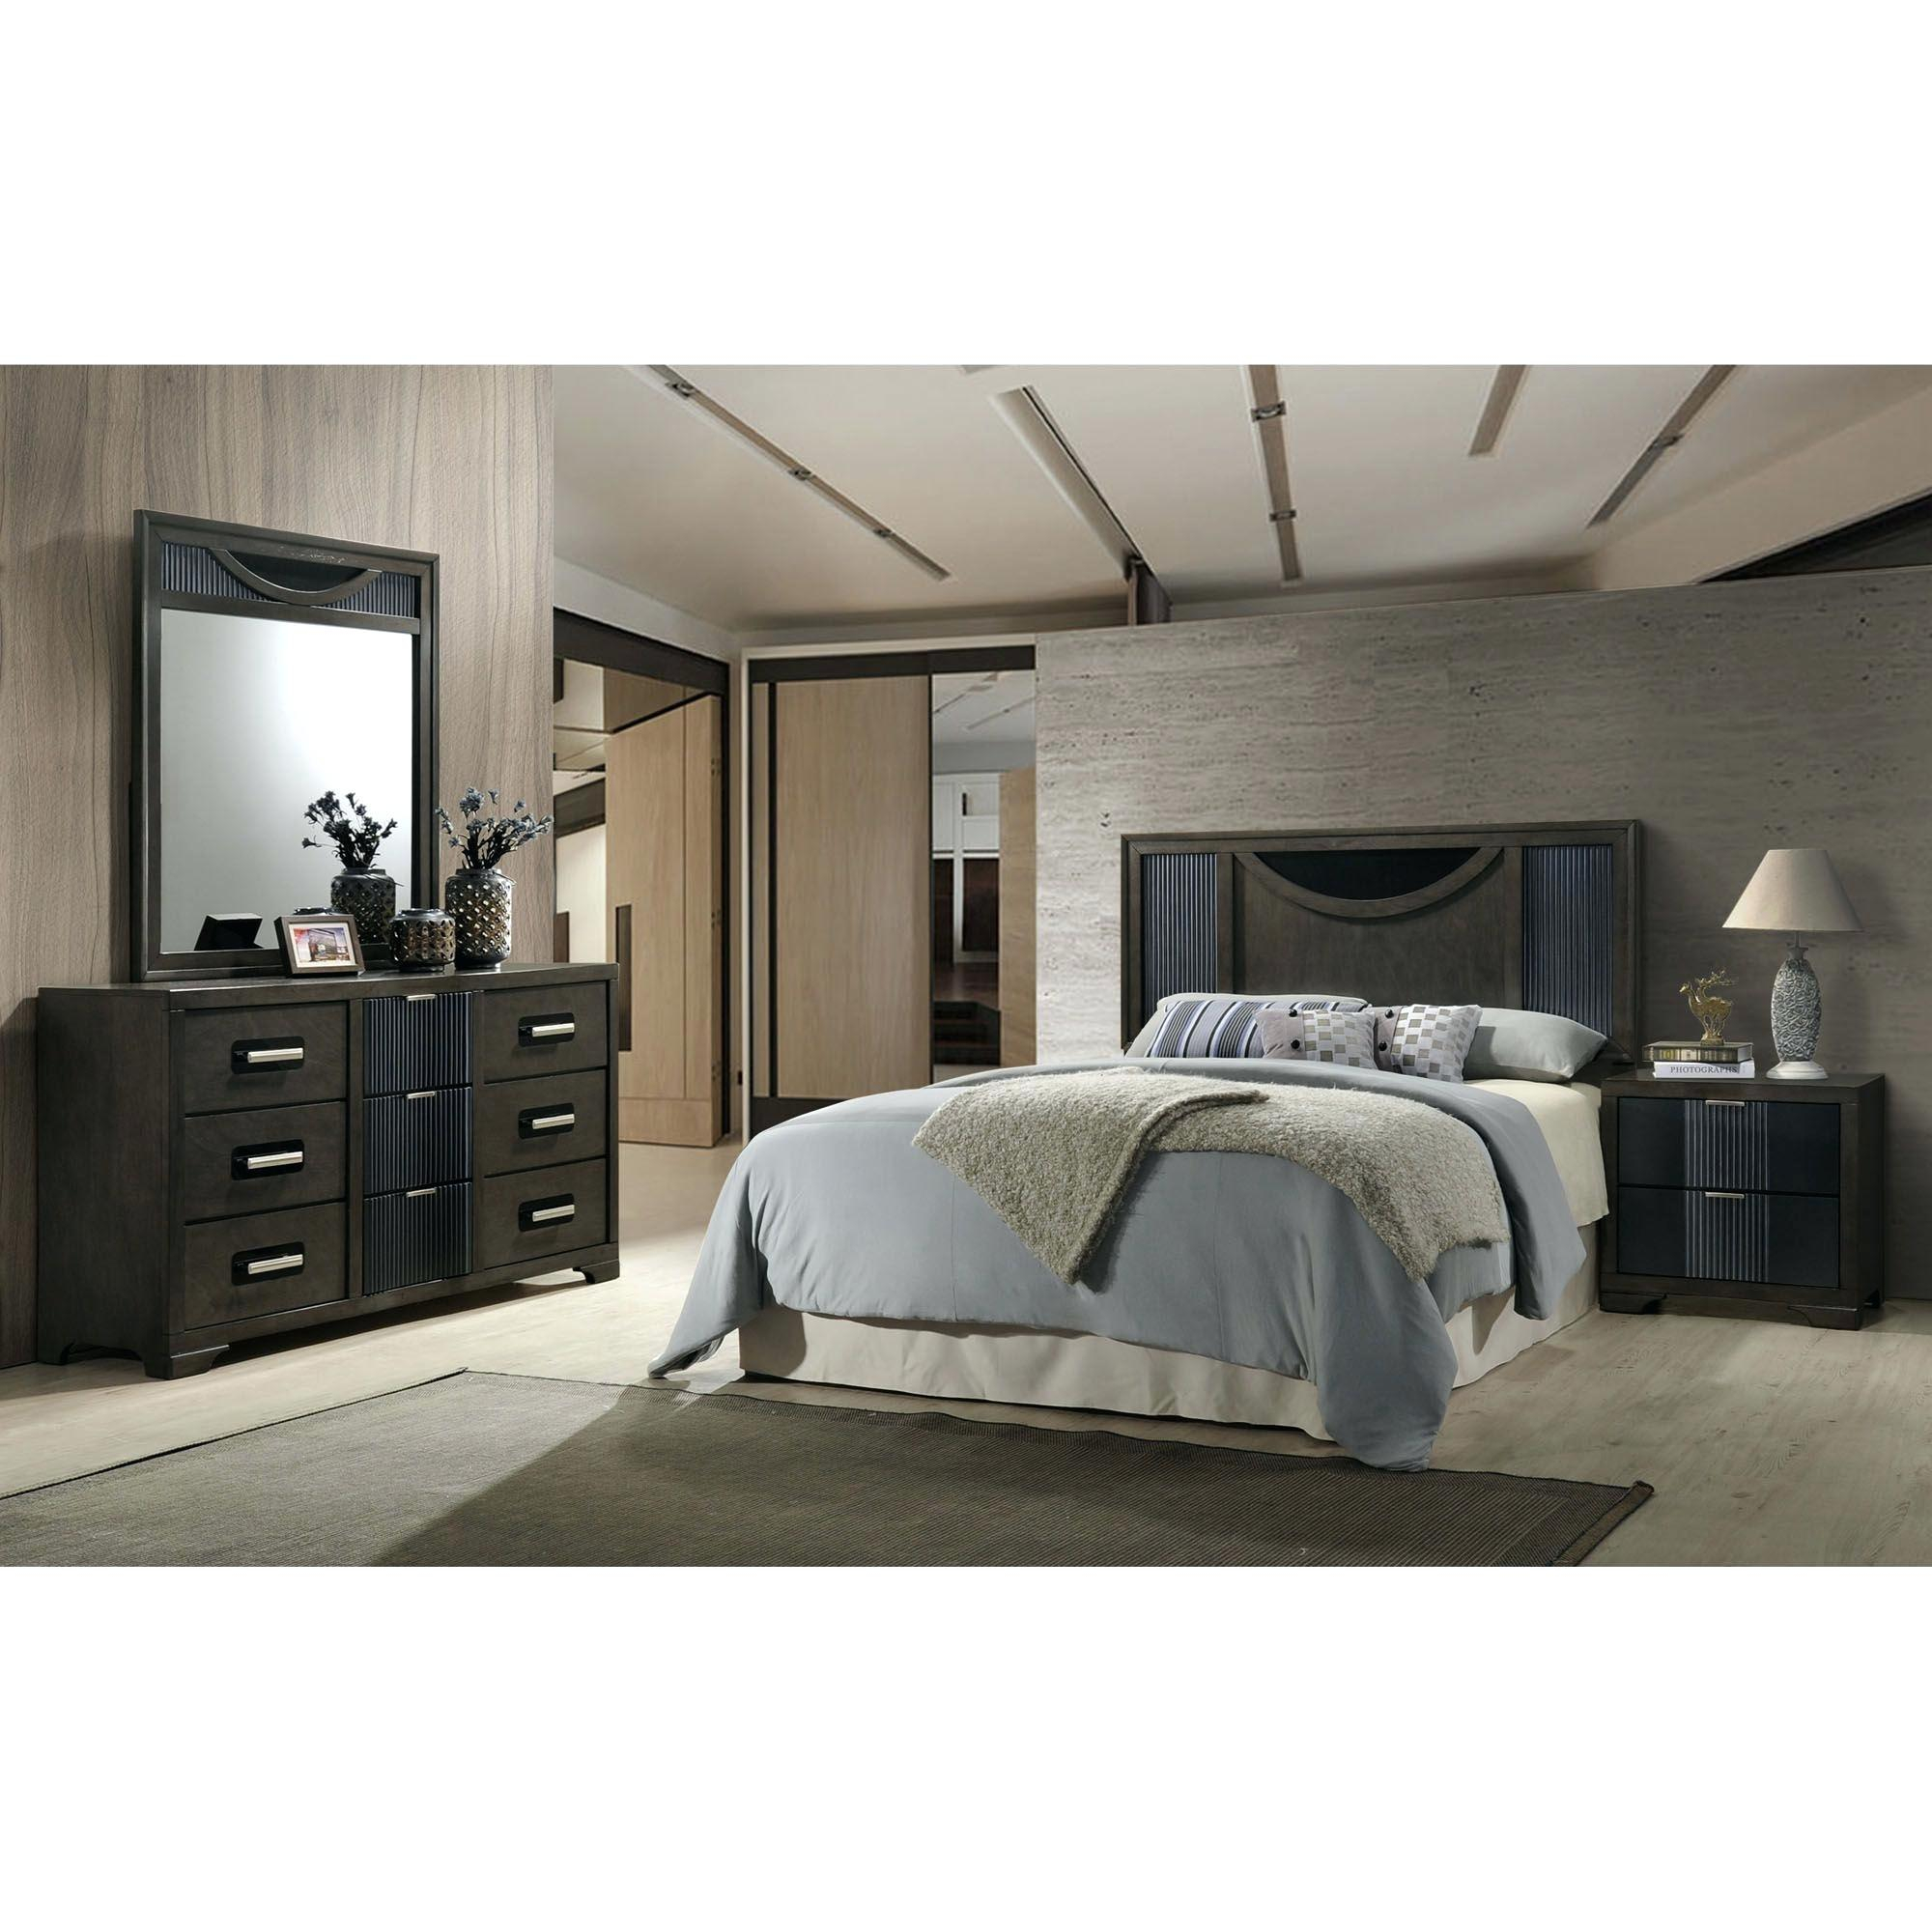 Finance Bedroom Set Bad Credit Furniture On For No Needed Financing with regard to measurements 2000 X 2000